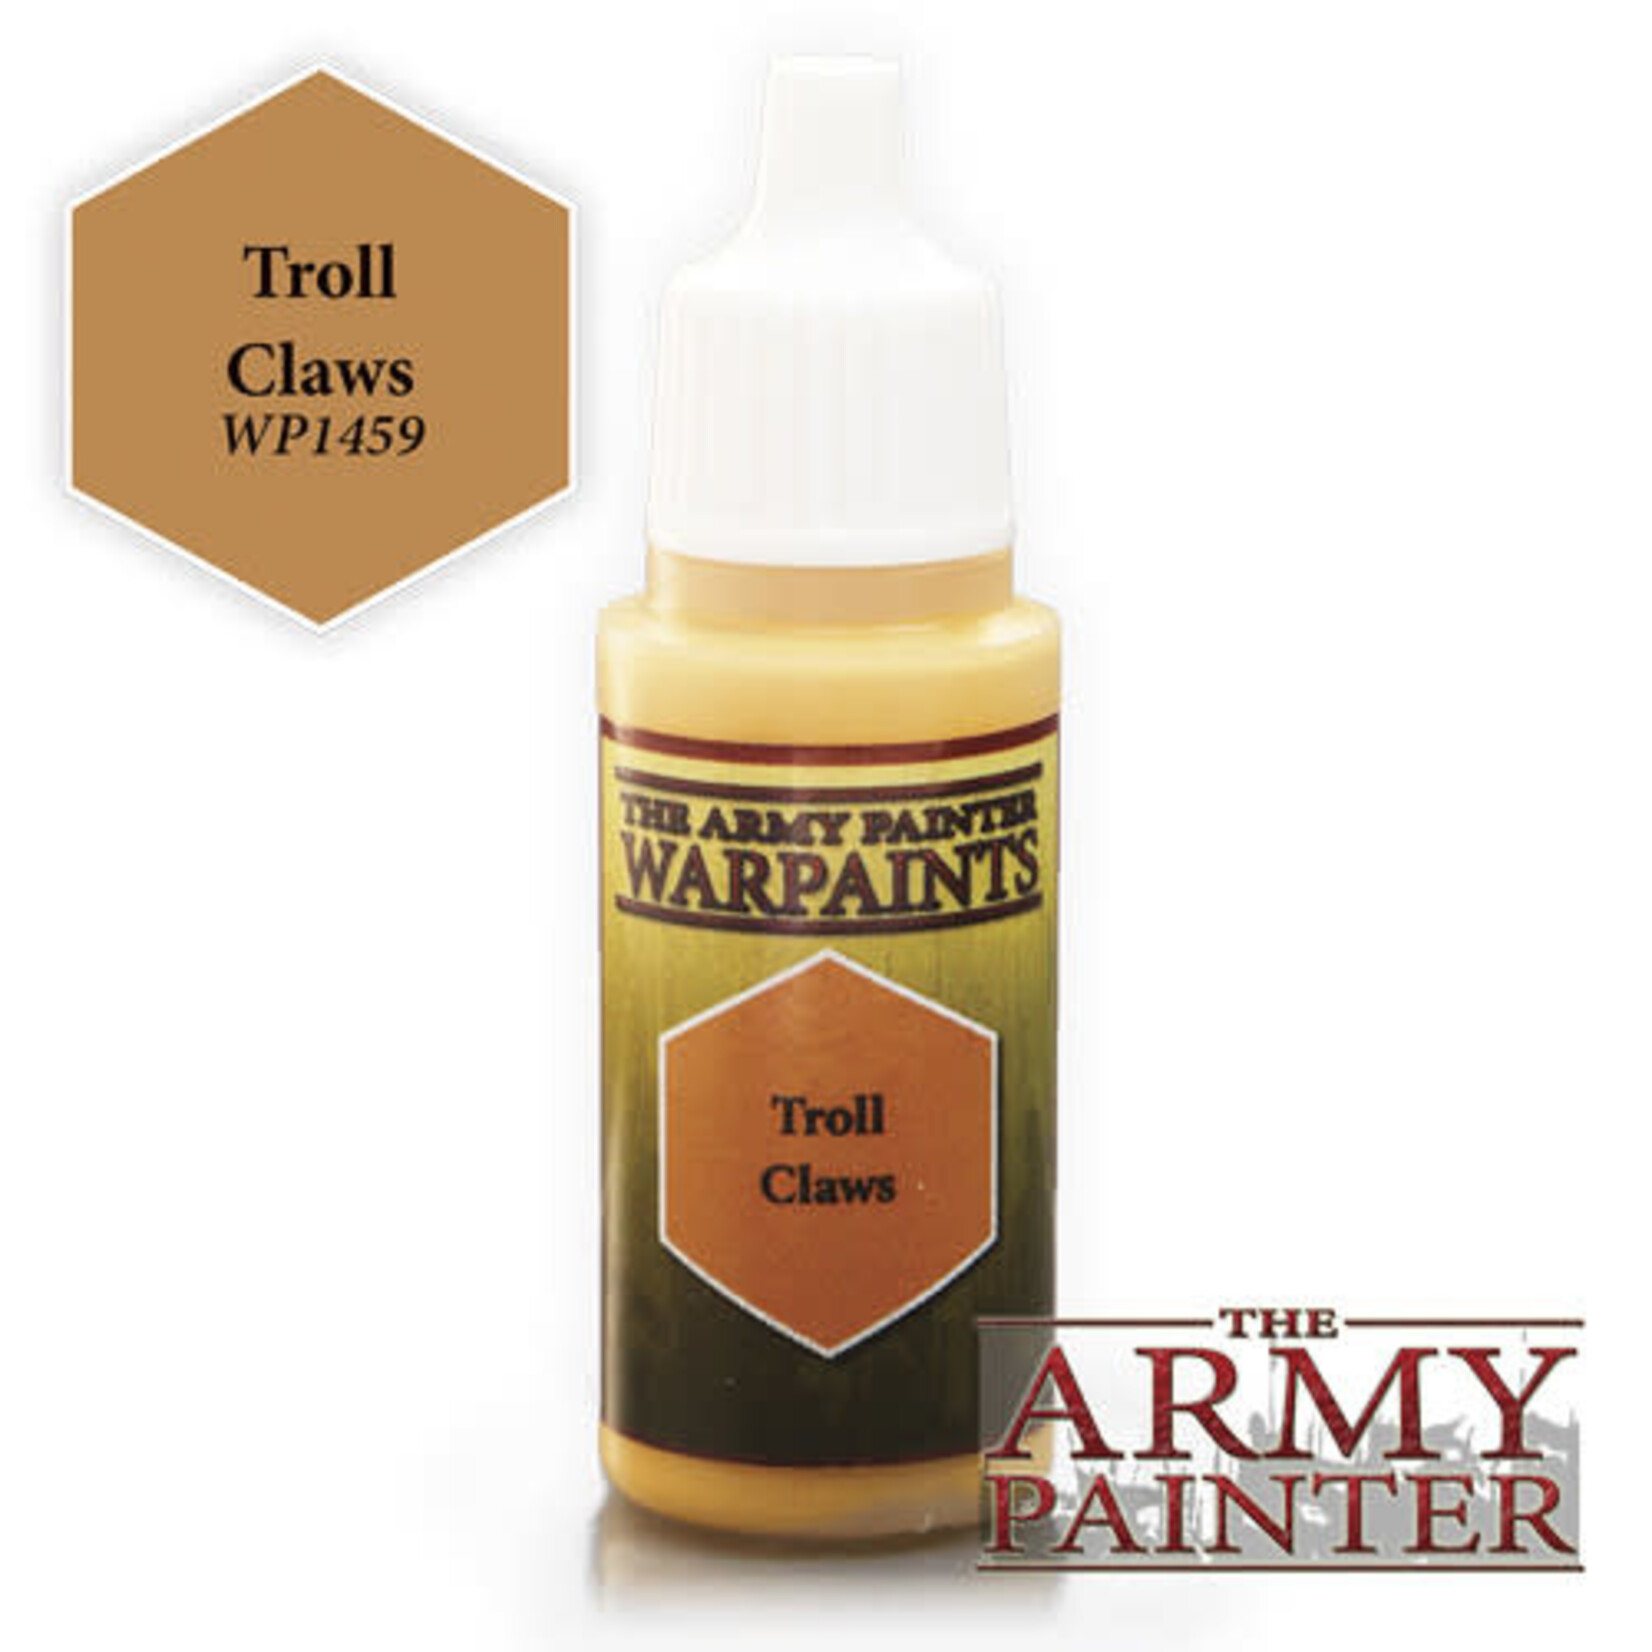 The Army Painter Warpaints: Troll Claws 18ml